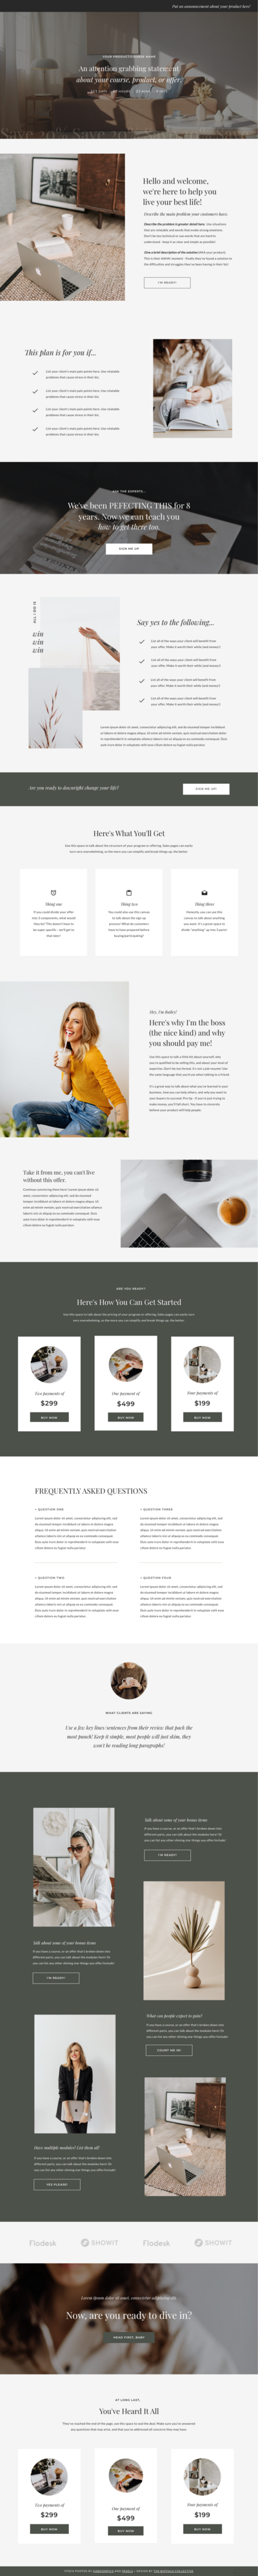 Sales Funnel Template by The Buffalo Collective